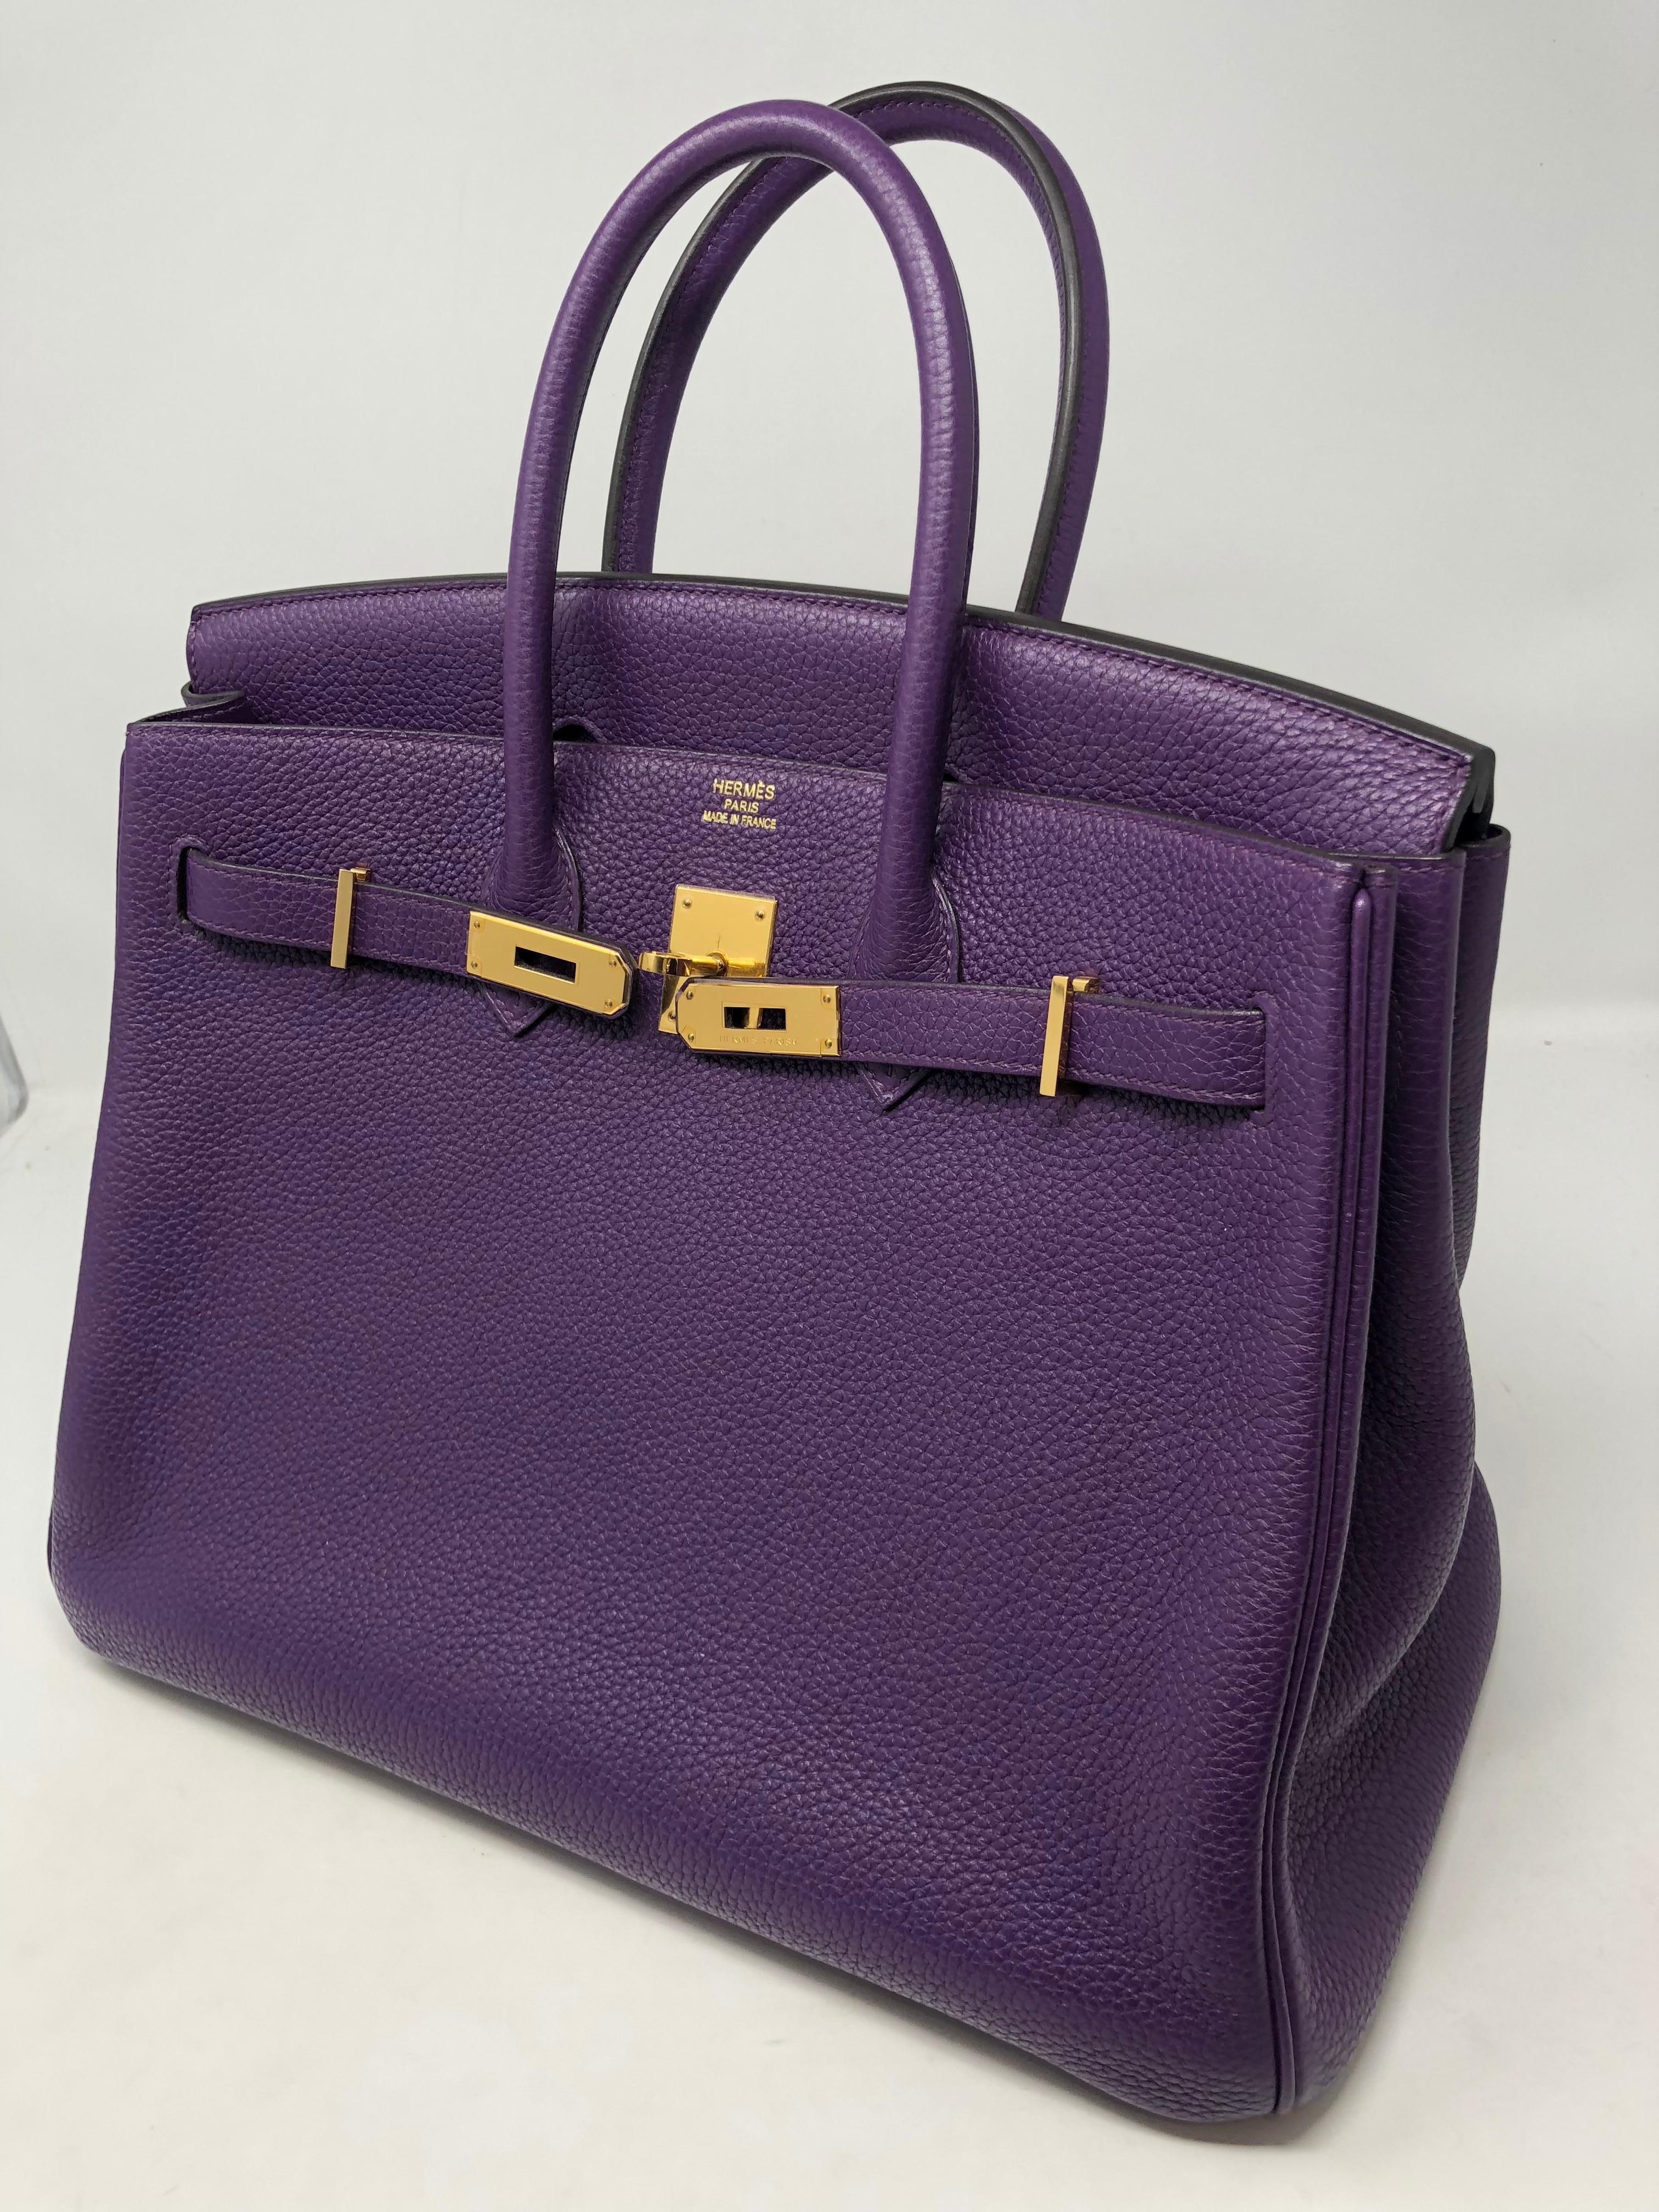 Hermes Ultraviolet Purple Birkin 35 with gold hardware. Clemence leather in mint condition. Beautiful and rare purple color known as ultraviolet. Hardware still has plastic on it from no wear. P square from 2012. Looks new. Ready for a good home.